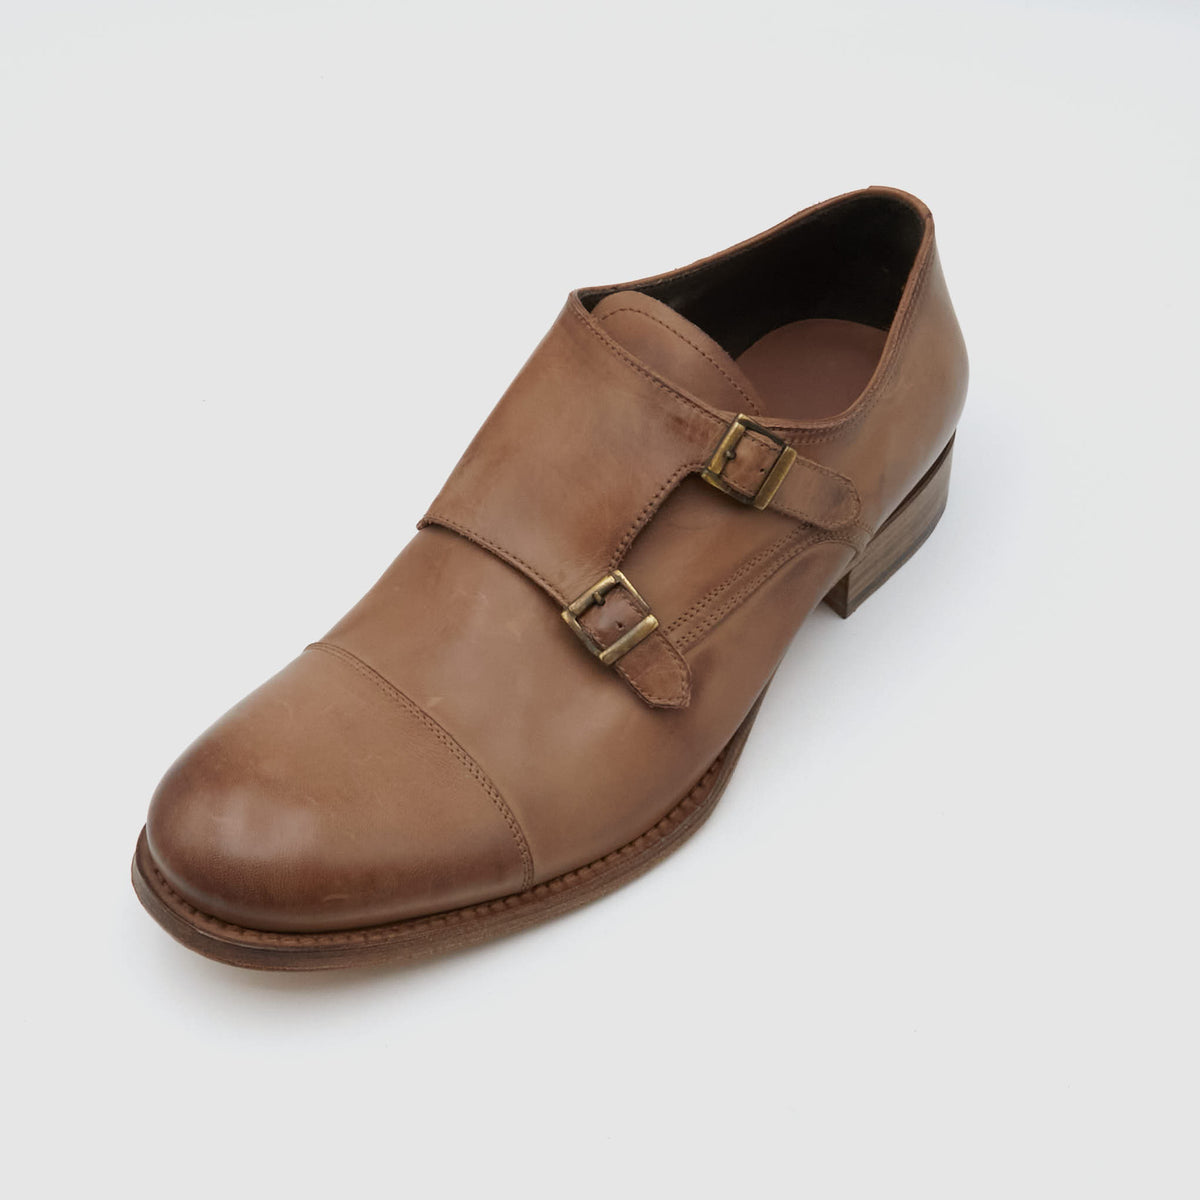 n.d.c. made by hand New Monk Vintage Look Shoe